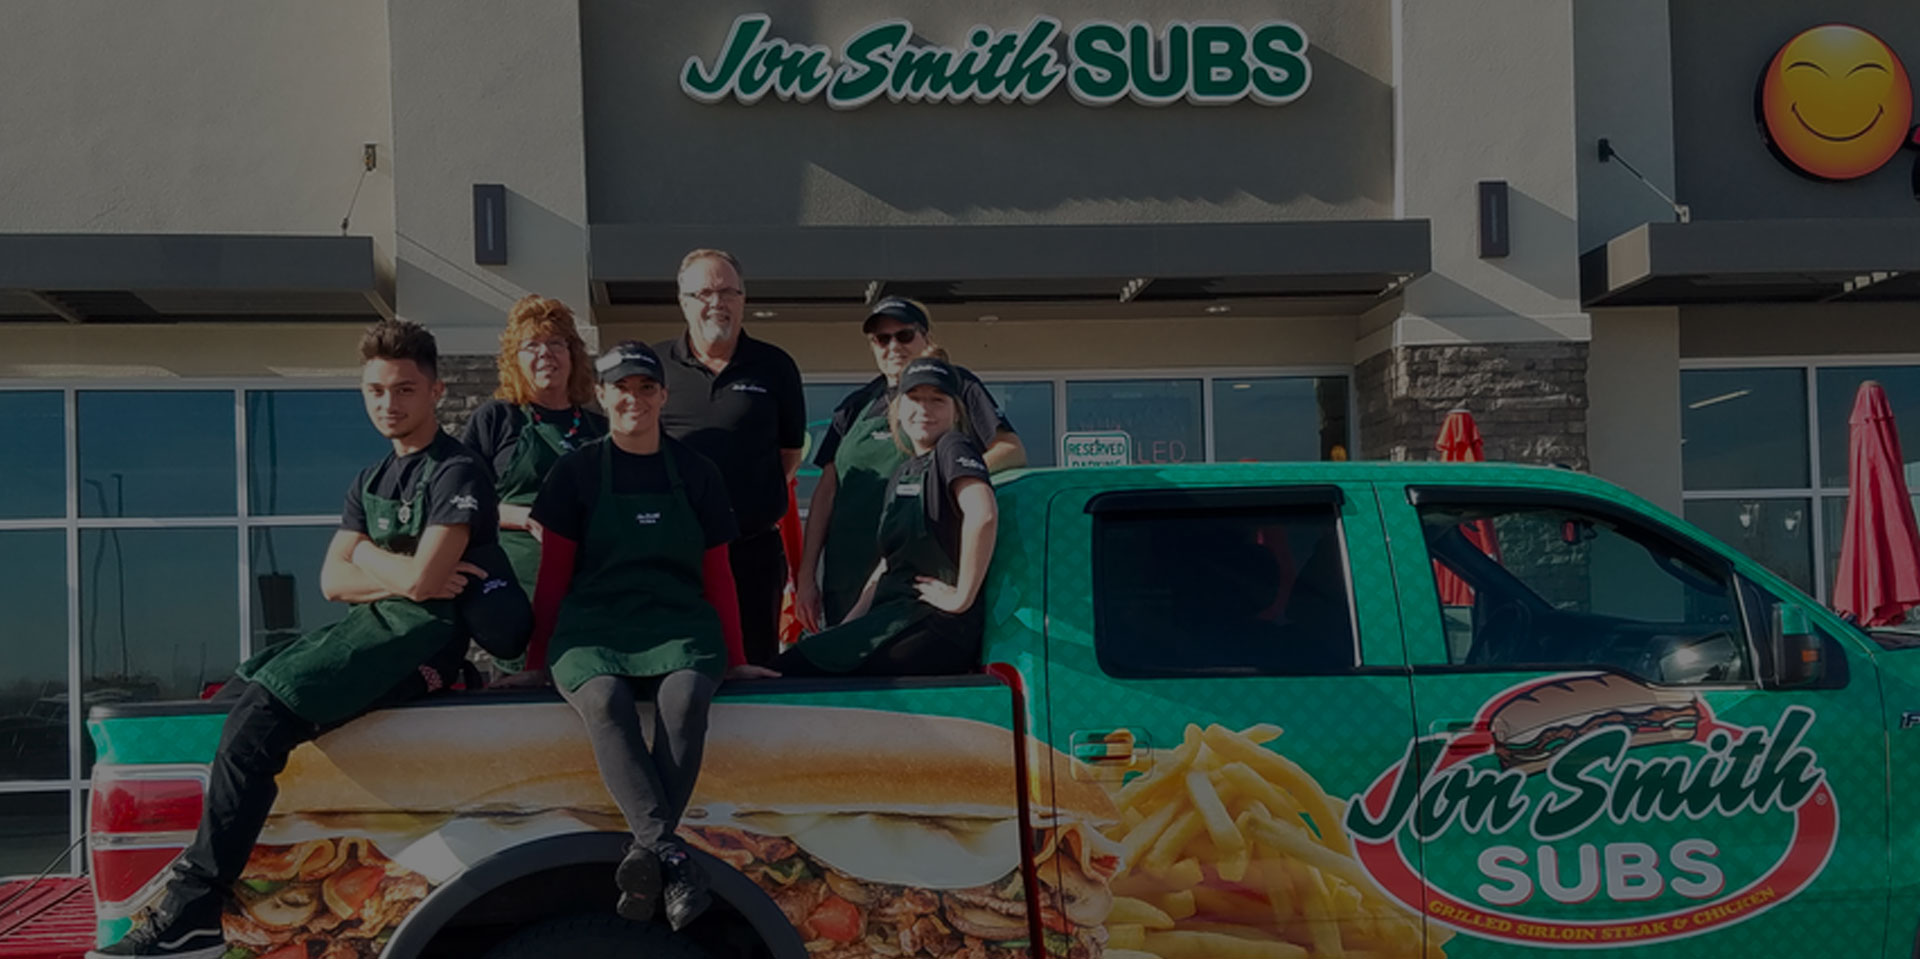 a team of Jon Smith Subs franchise employees